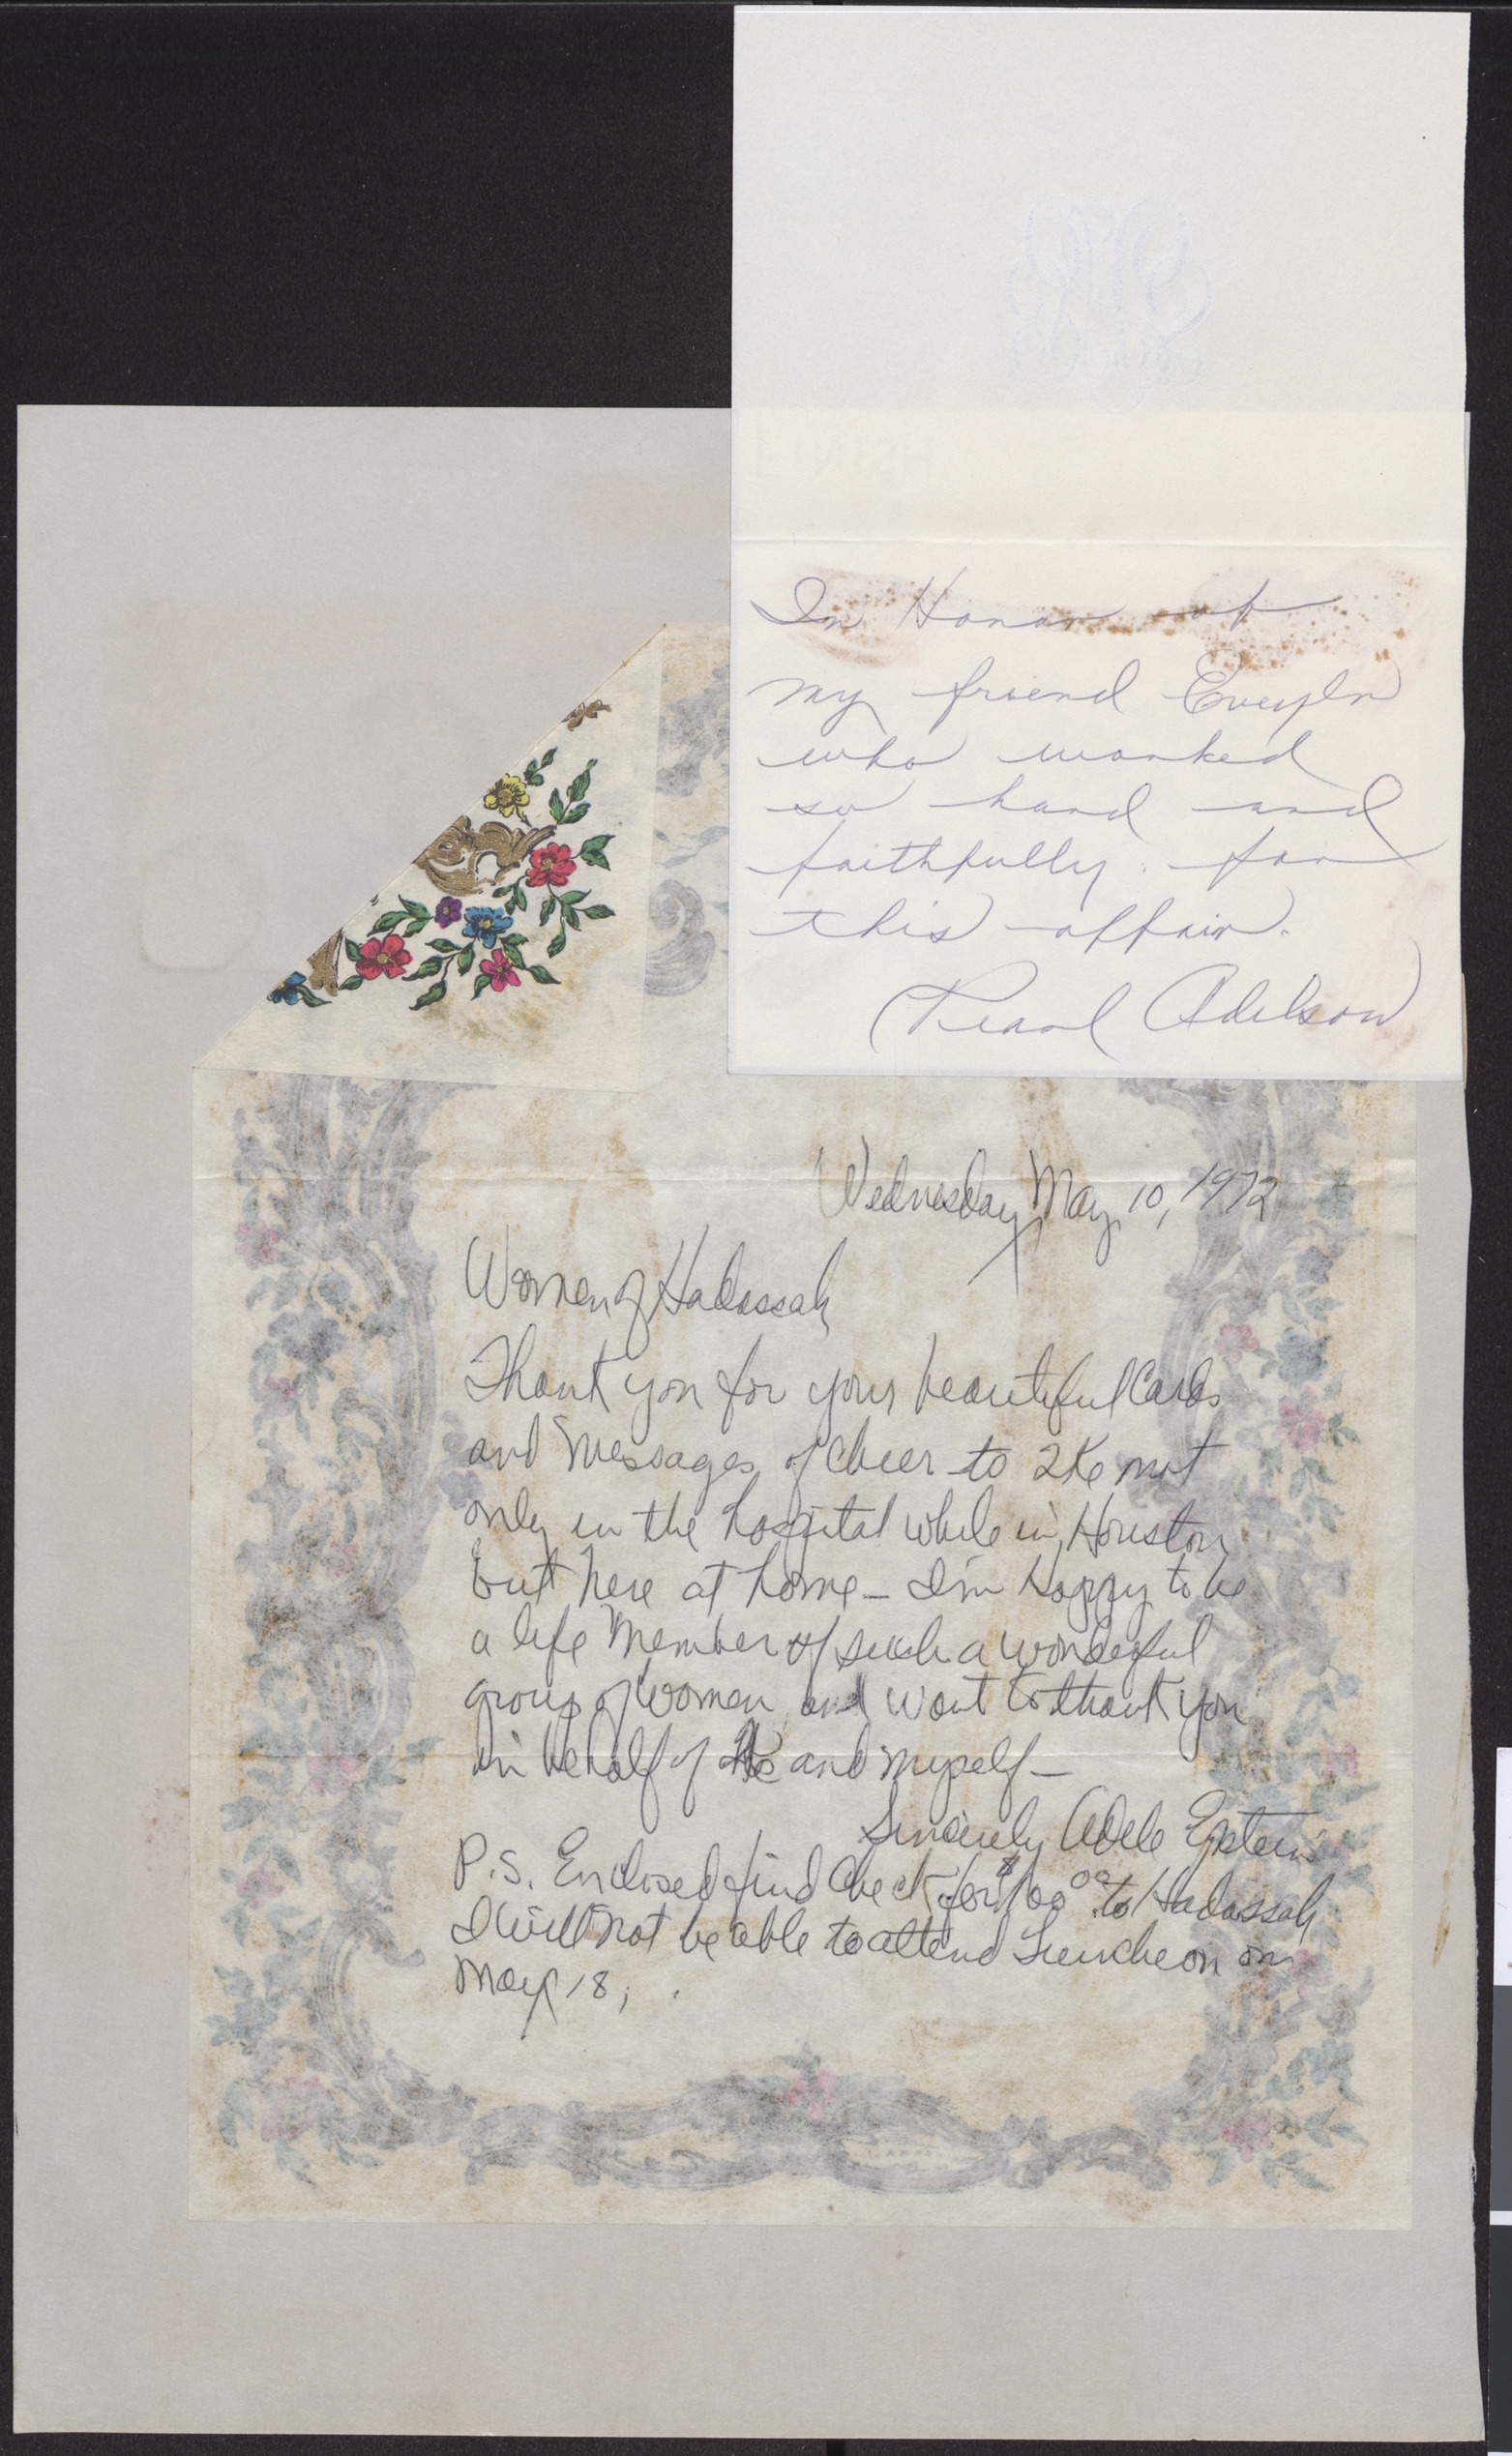 Note from Pearl Adelson to Evelyn, undated